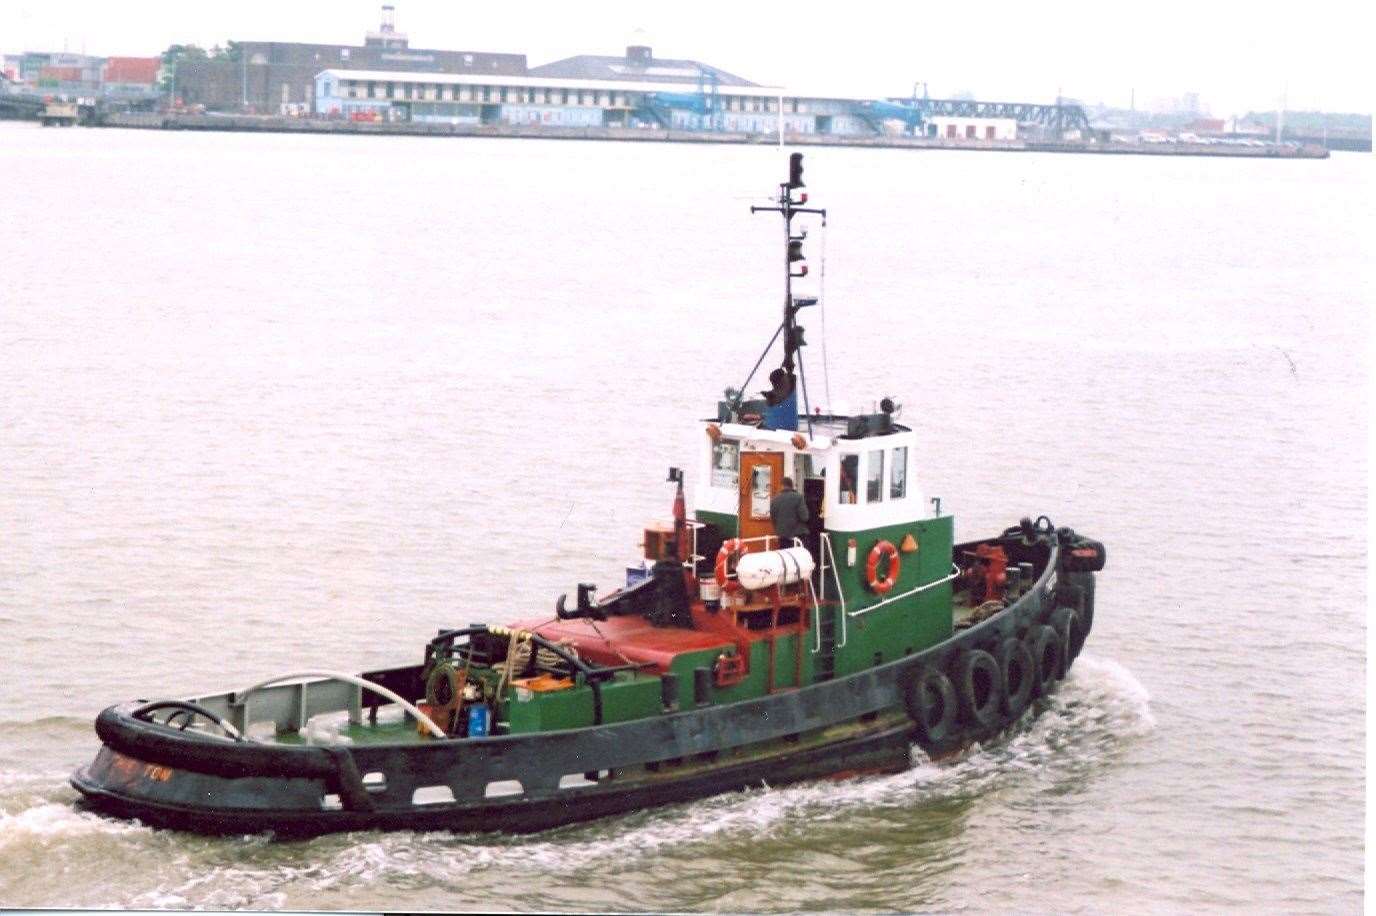 Darren Lacey died after the Chiefton tug sunk in the River Thames in 2011